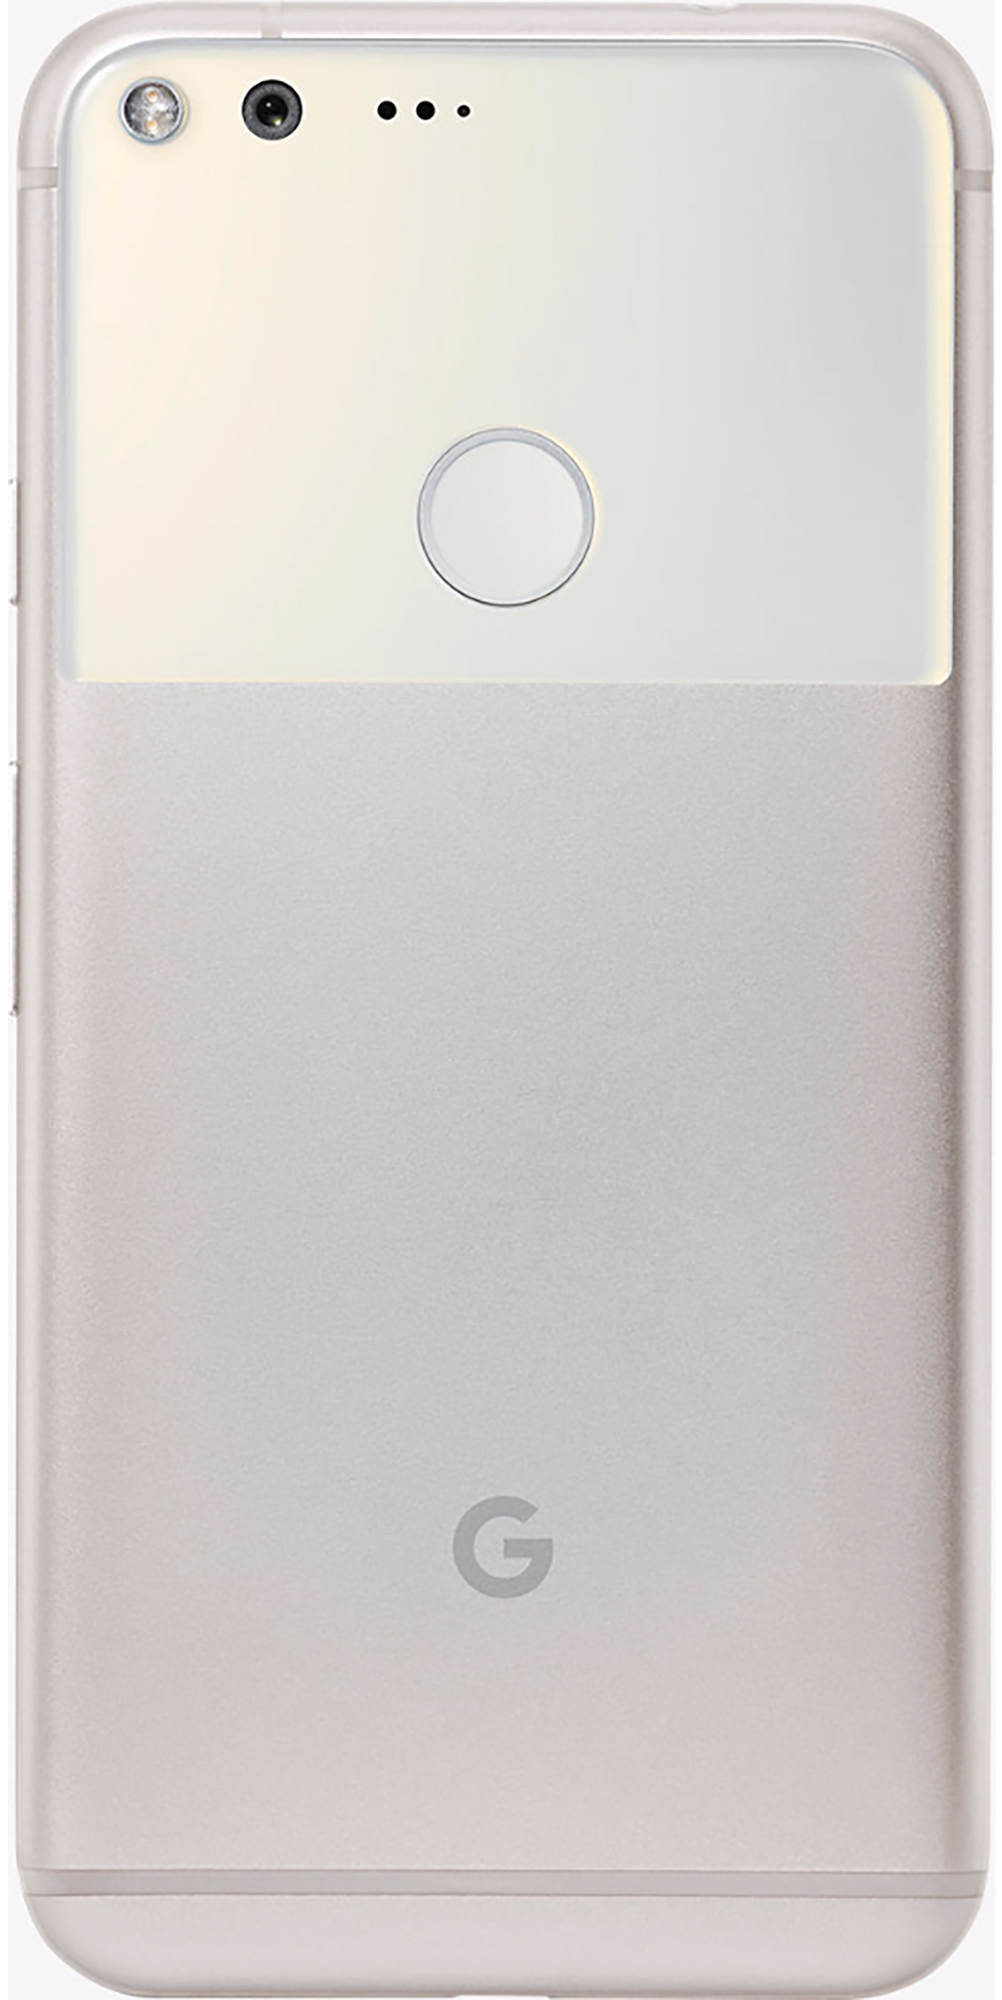 Google Pixel XL 32GB Unlocked GSM Phone with 12.3MP Camera - Very Silver - image 2 of 3